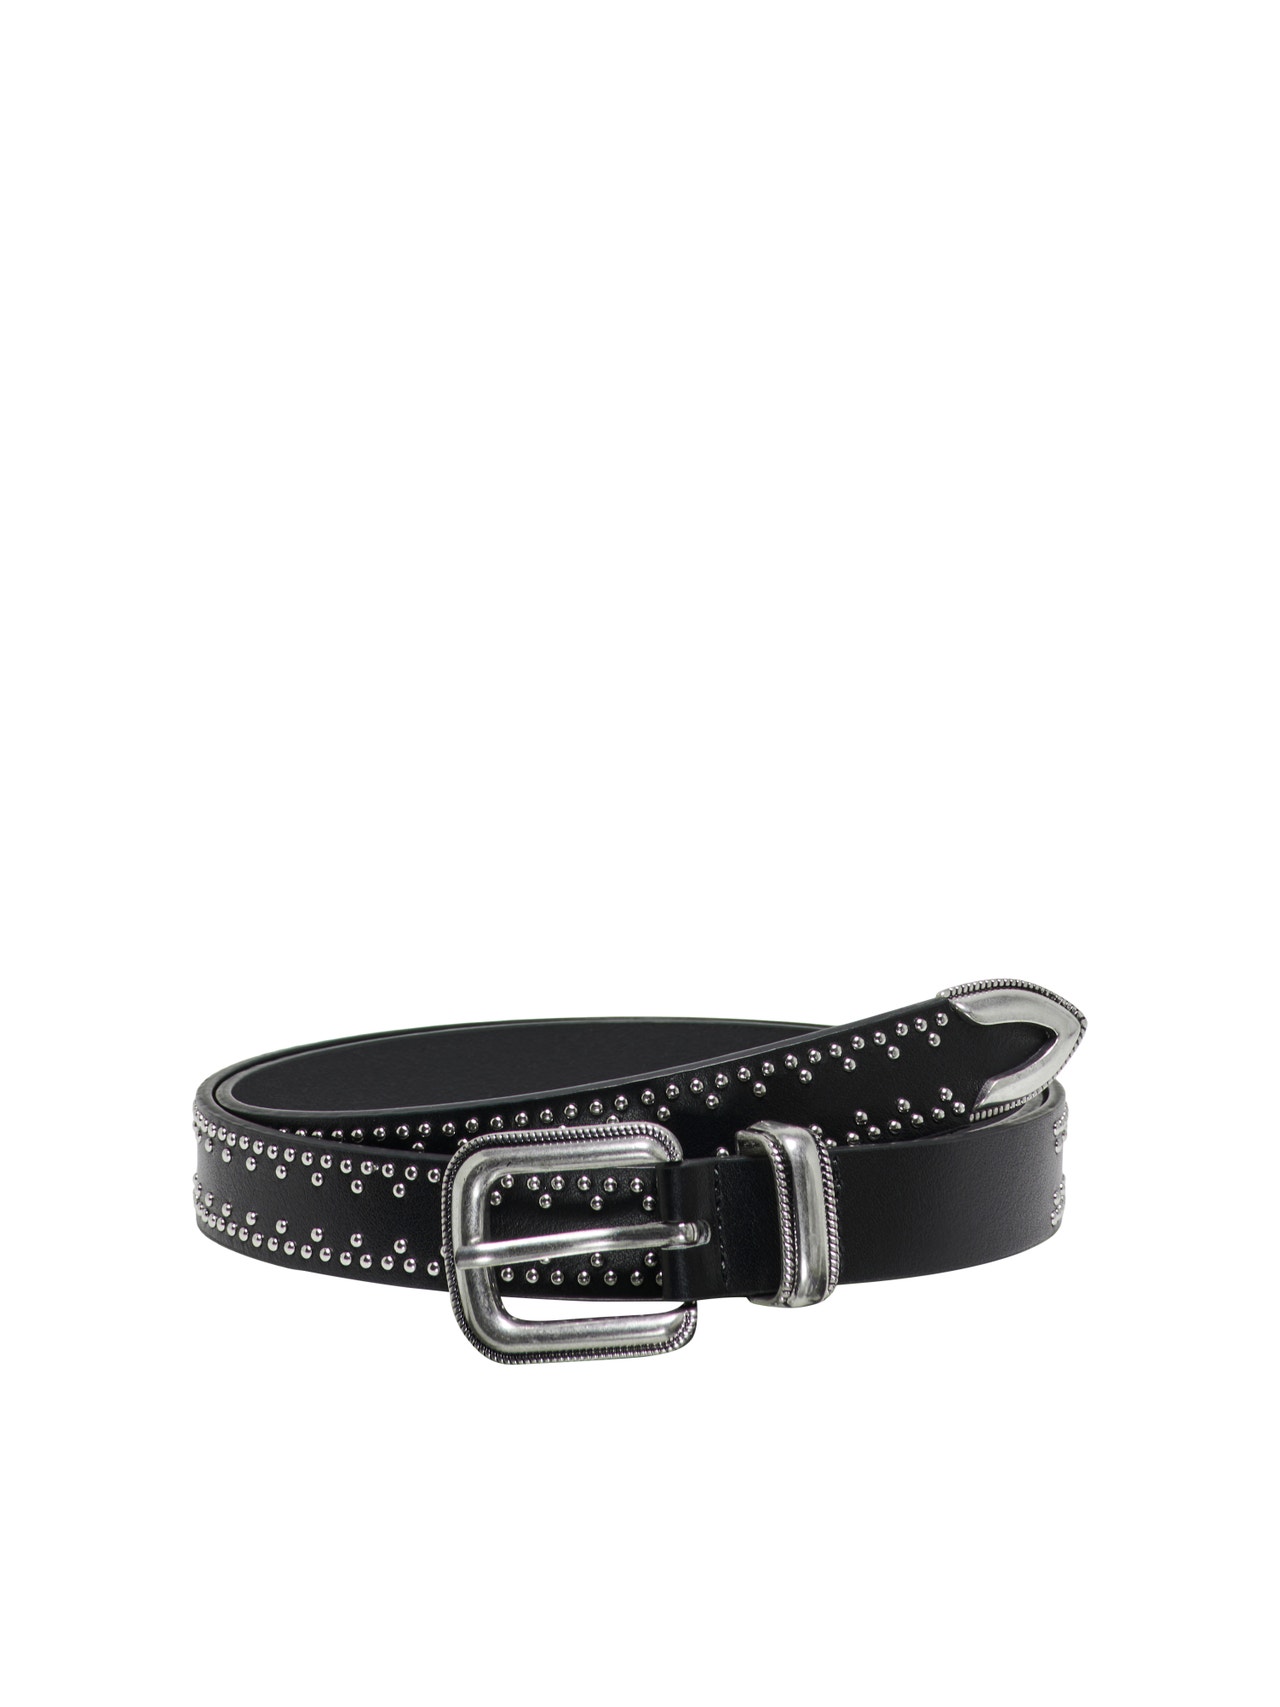 ONLY Leather look Belt -Black - 15300885